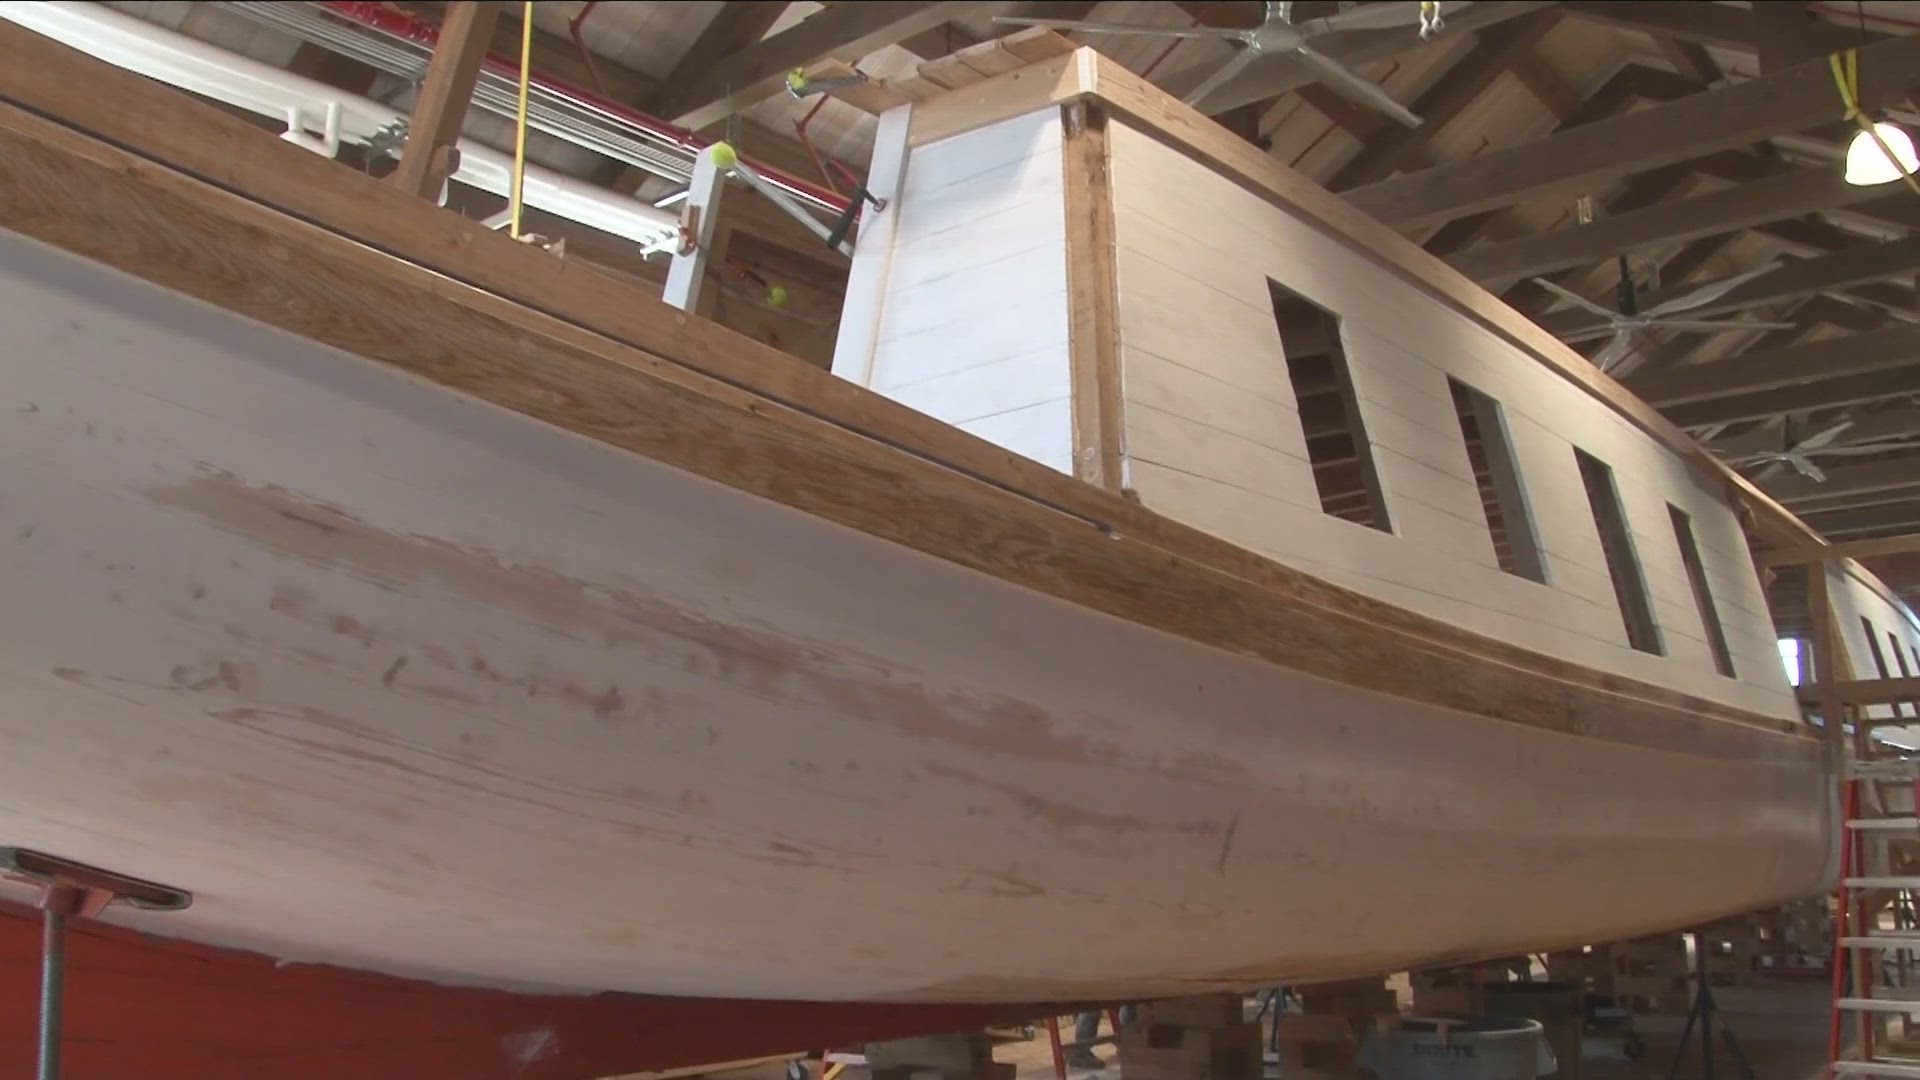 Roger Allen, Master Boatbuilder gives us and update on the canal boat